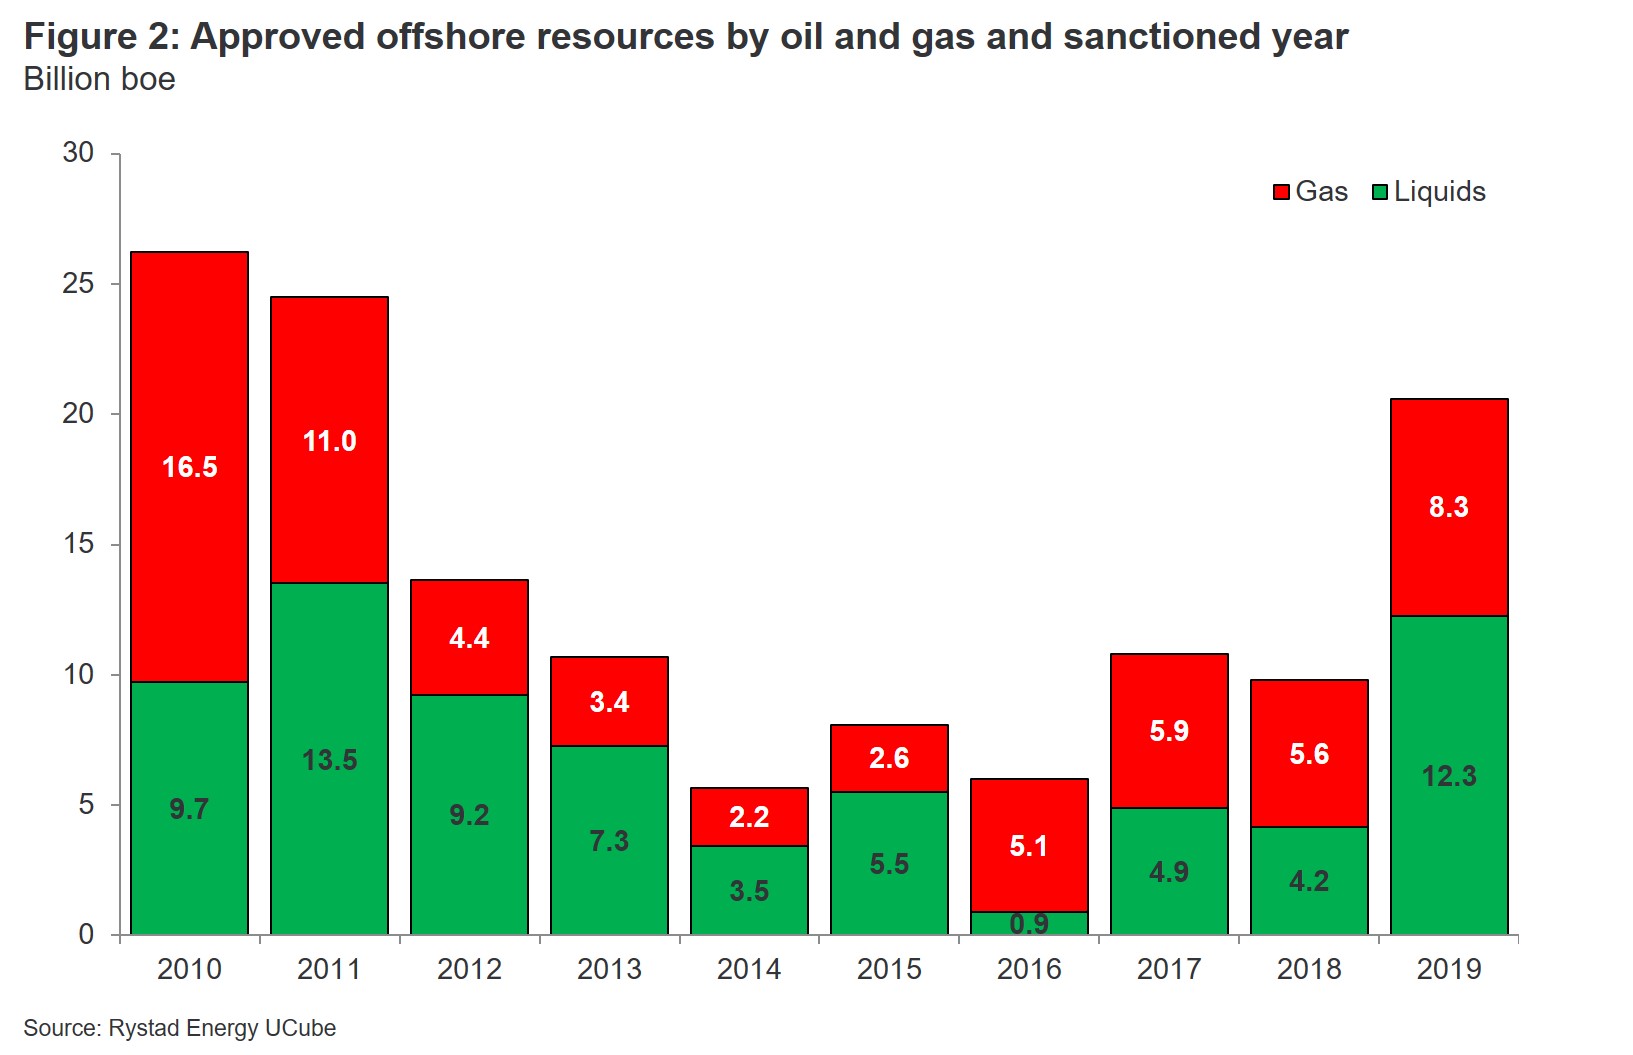 Chart showing approved offshore resources by oil and gas and sanctioned year from 2010 to 2019